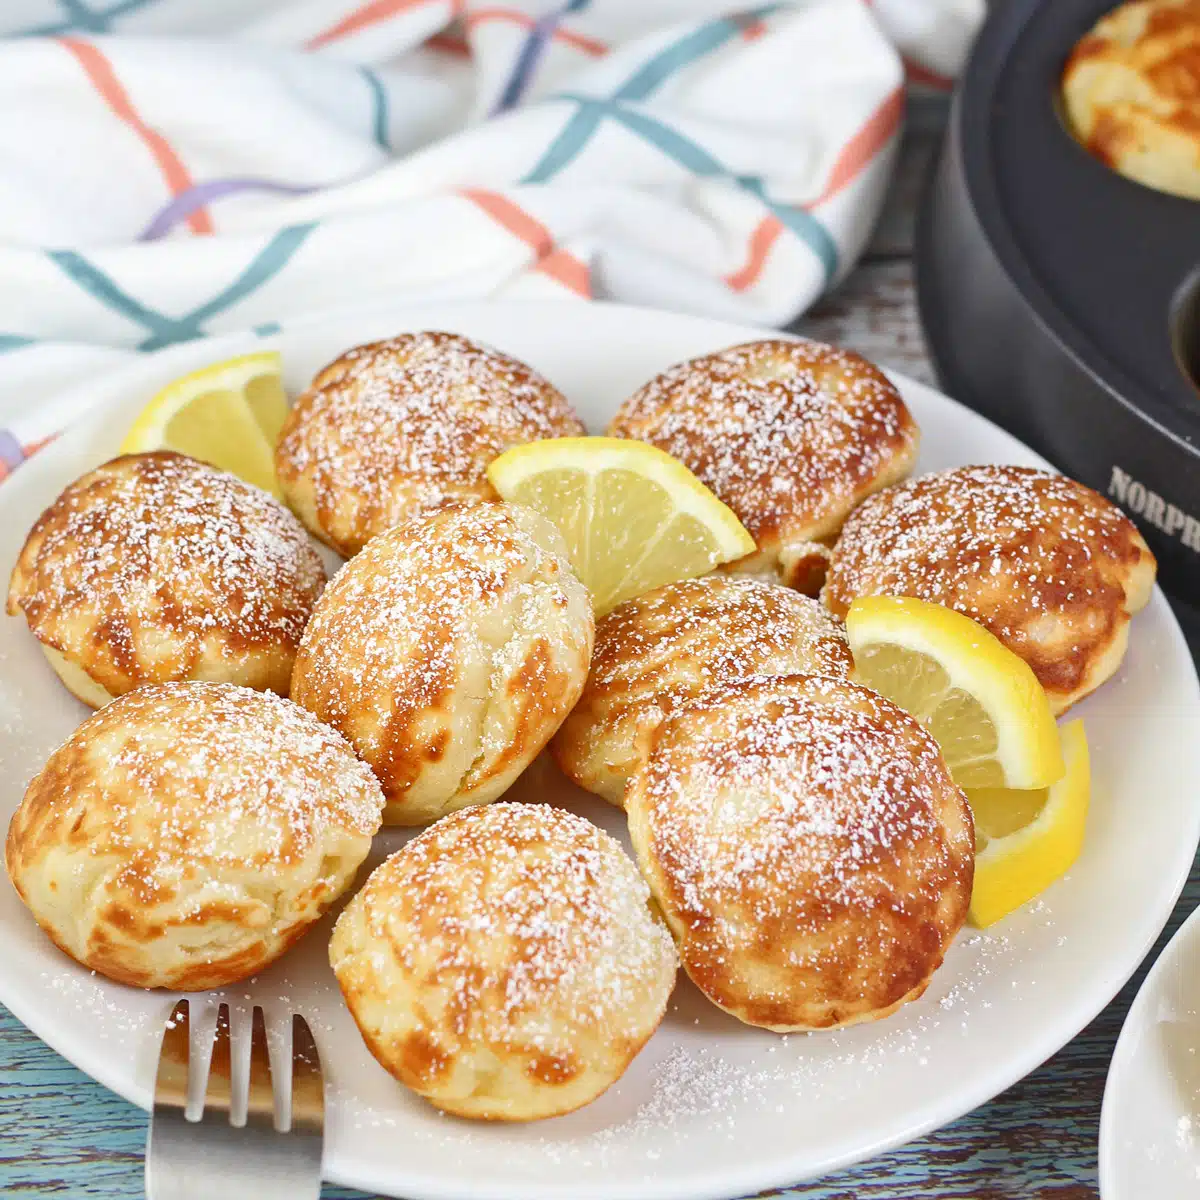 Tasty puffed Dutch pancakes or poffertjes on white plate with small lemon wedges and a dusting of confectioners powdered sugar.